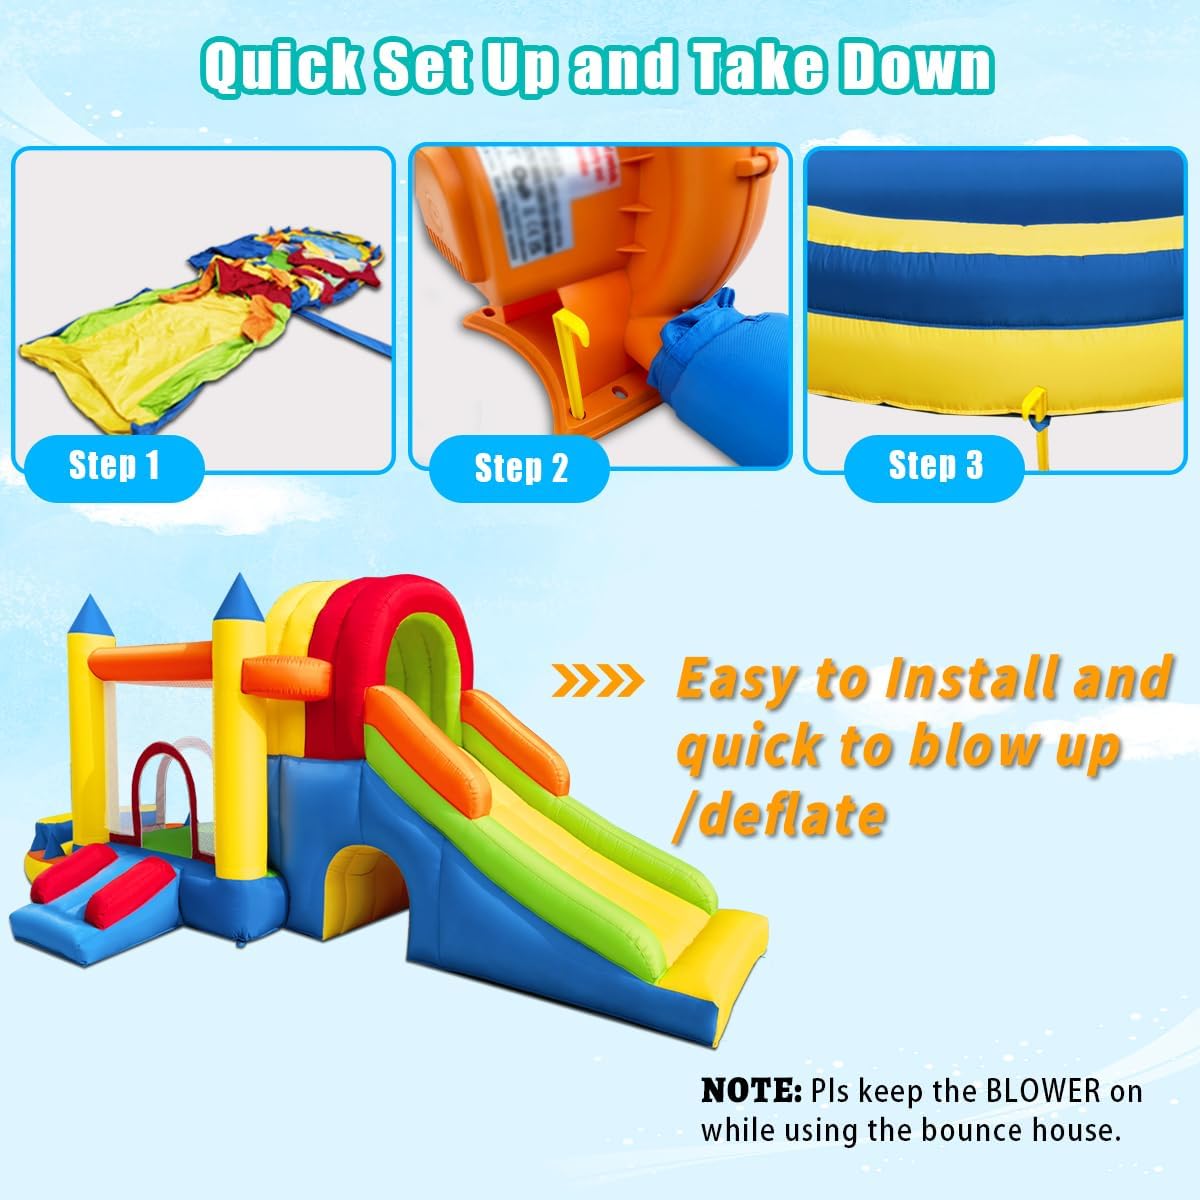 Baralir Inflatable Bouncy Castle, 8 in 1 Large Bounce House with Blower for Kids and Toddlers, Outdoor Indoor Backyard Inflatable Bouncers with Two Slides